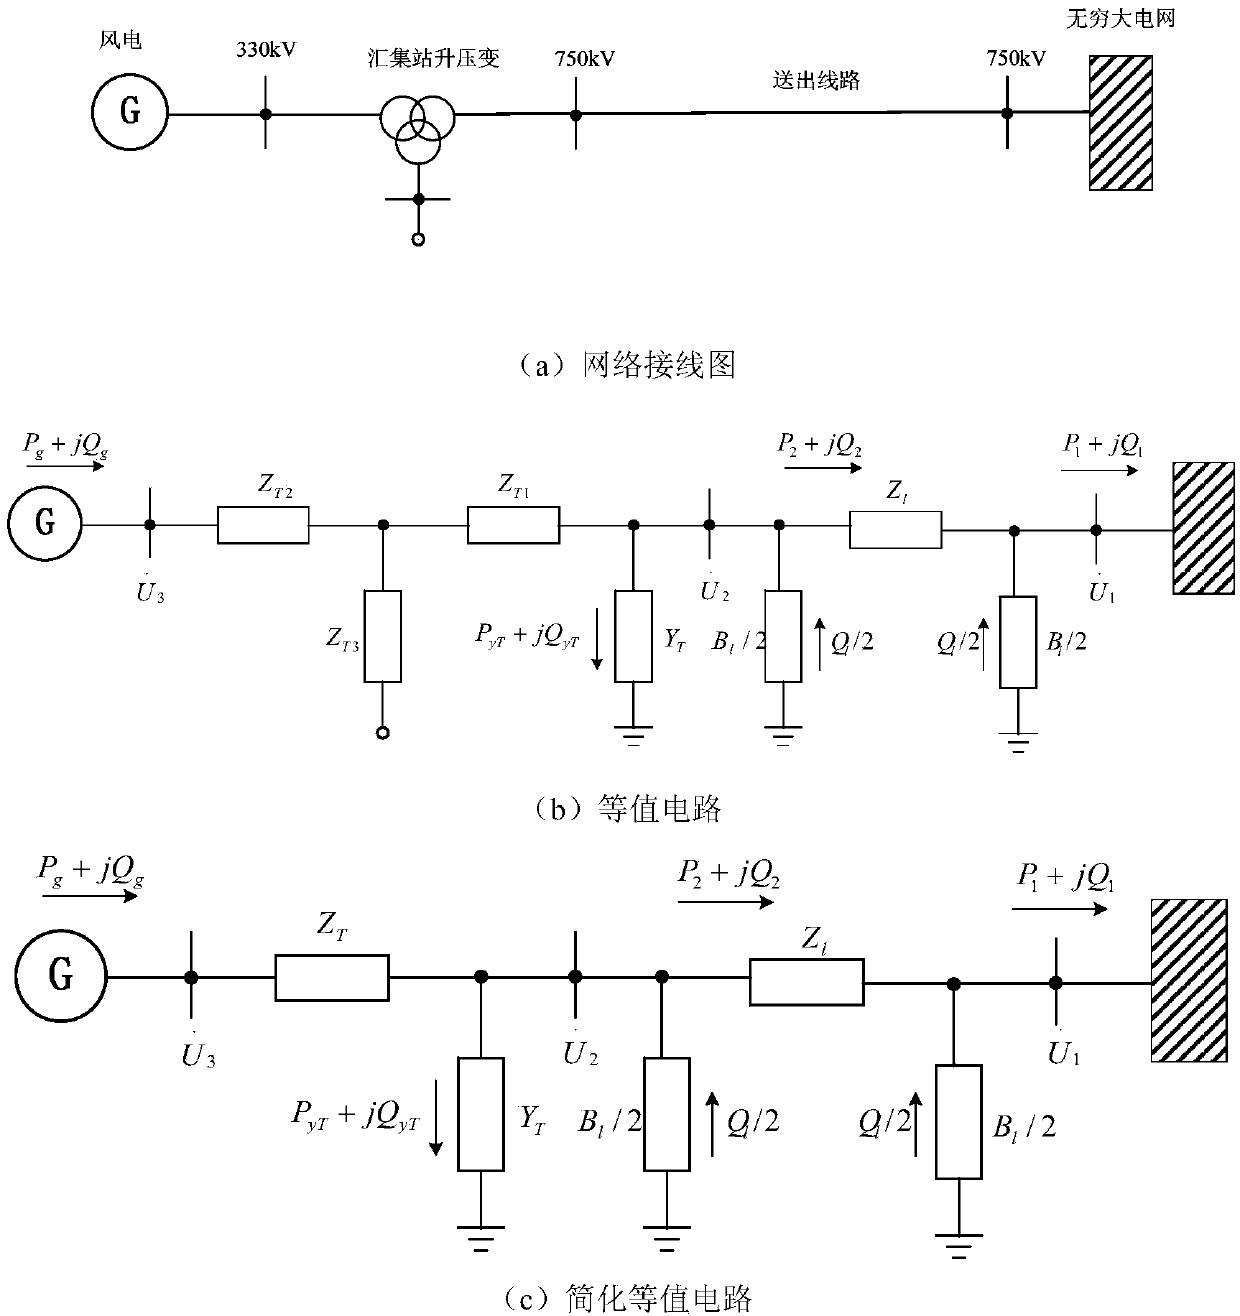 Reactive compensation configuration method based on reactive voltage feature for wind power 500kV collecting transformer substation